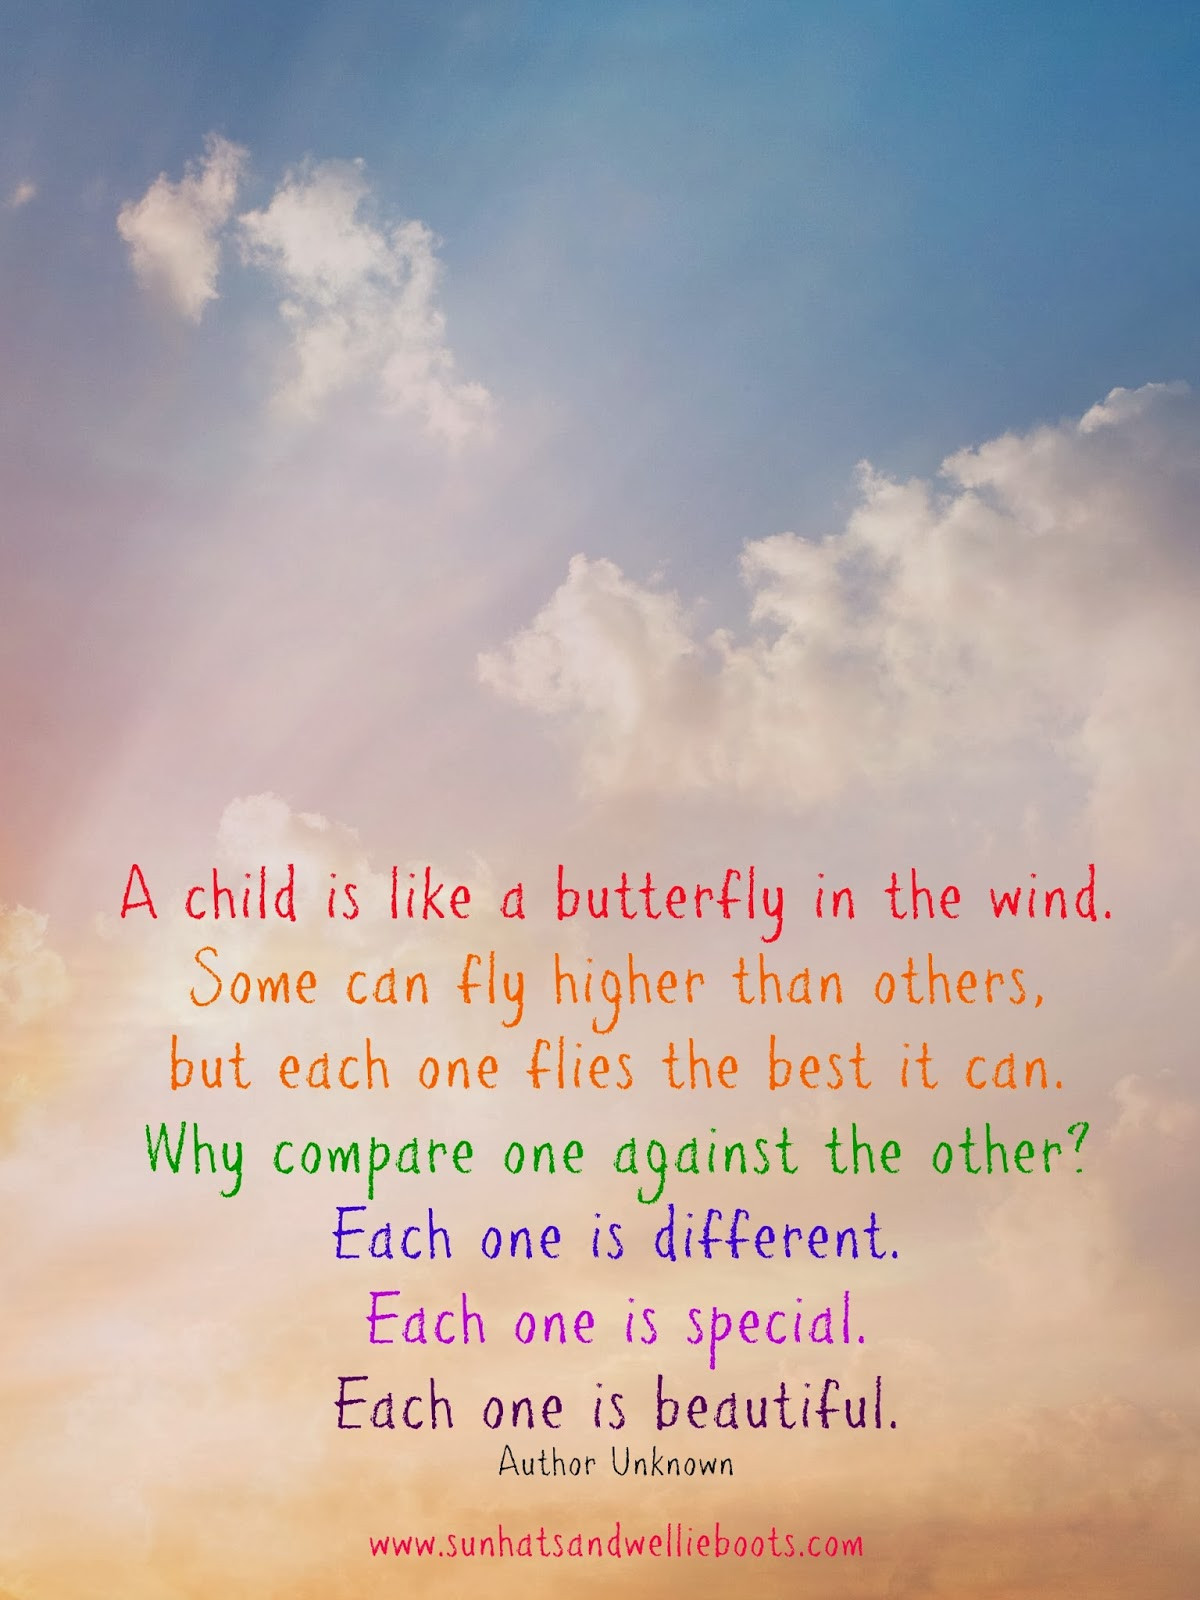 Quotes For A Child
 Wind Poems And Quotes QuotesGram